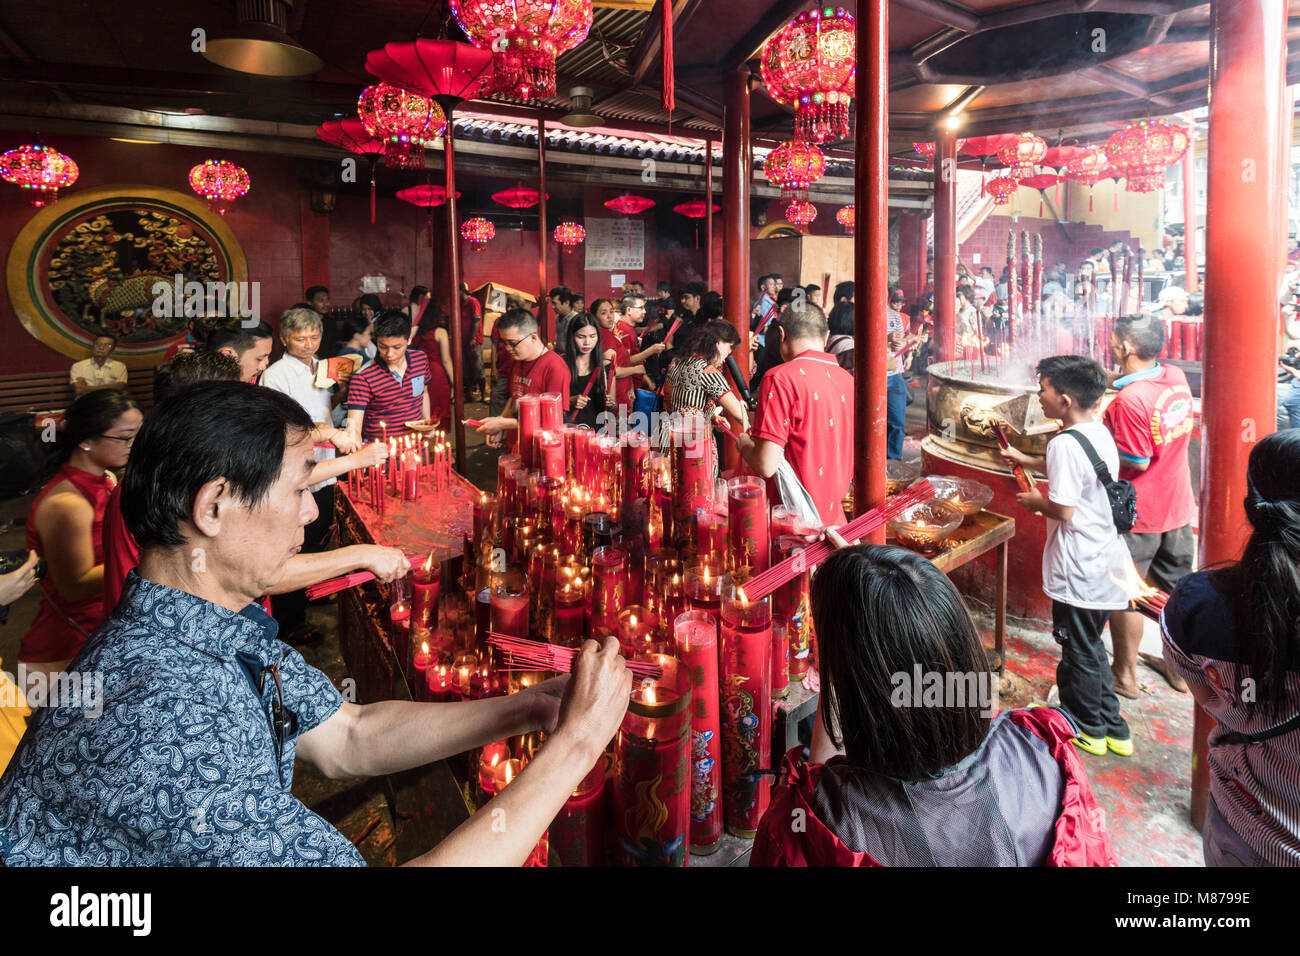 Jakarta, Indonesia - February 16 2018: People celebrate Chinese new year in the Jin De Yuan temple in Glodok, Jakarta Chinatown. The city hold a signi Stock Photo